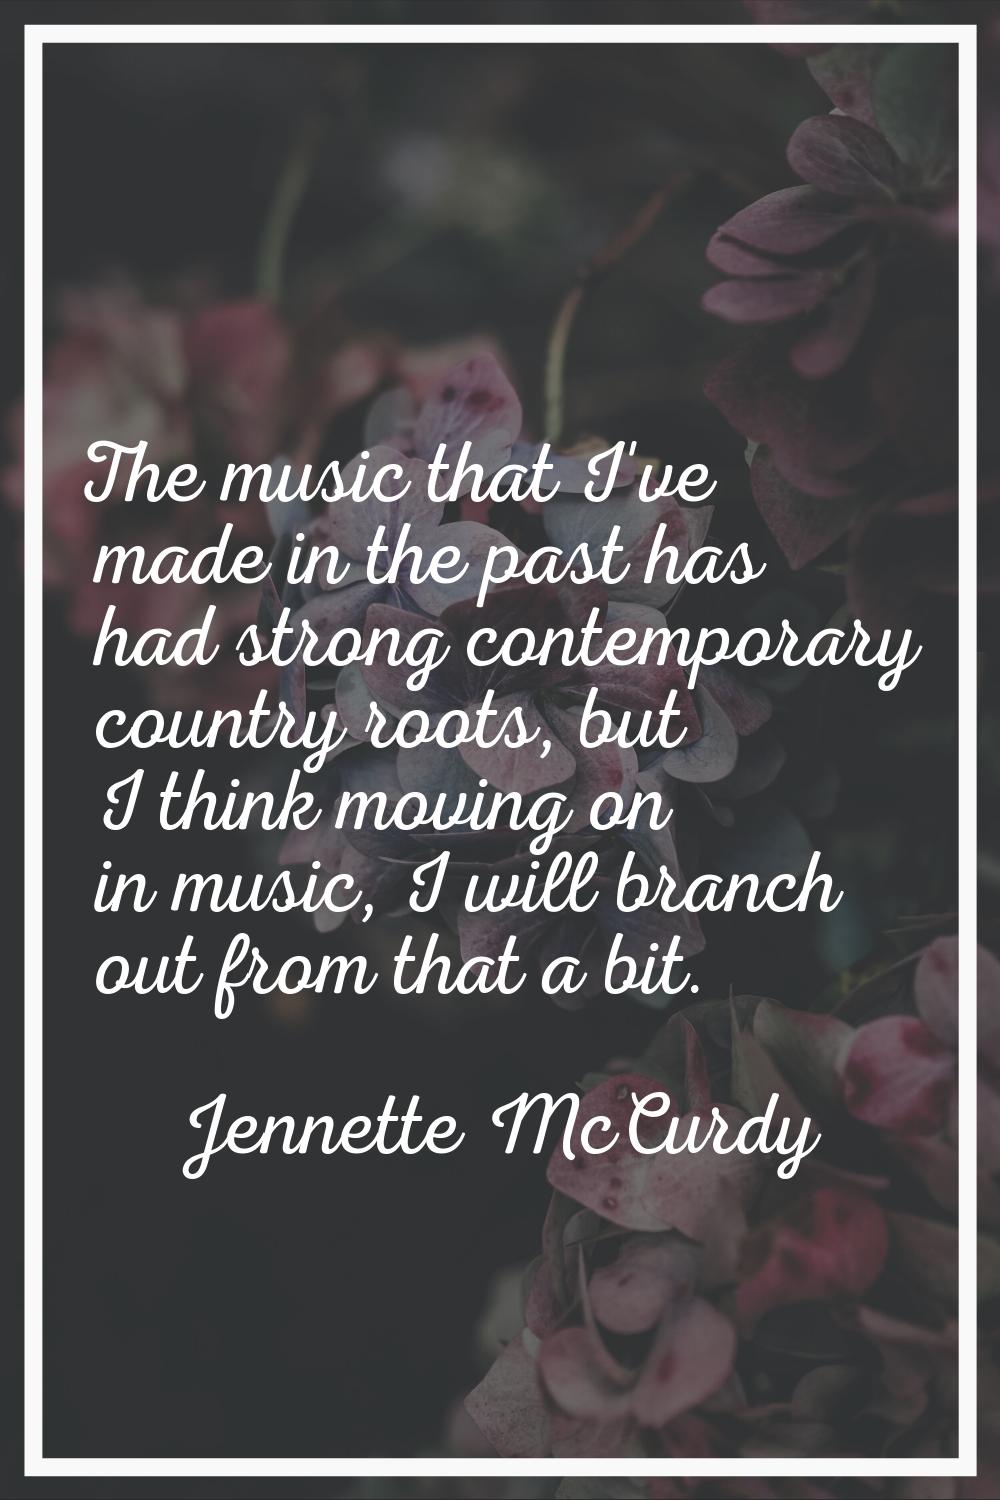 The music that I've made in the past has had strong contemporary country roots, but I think moving 